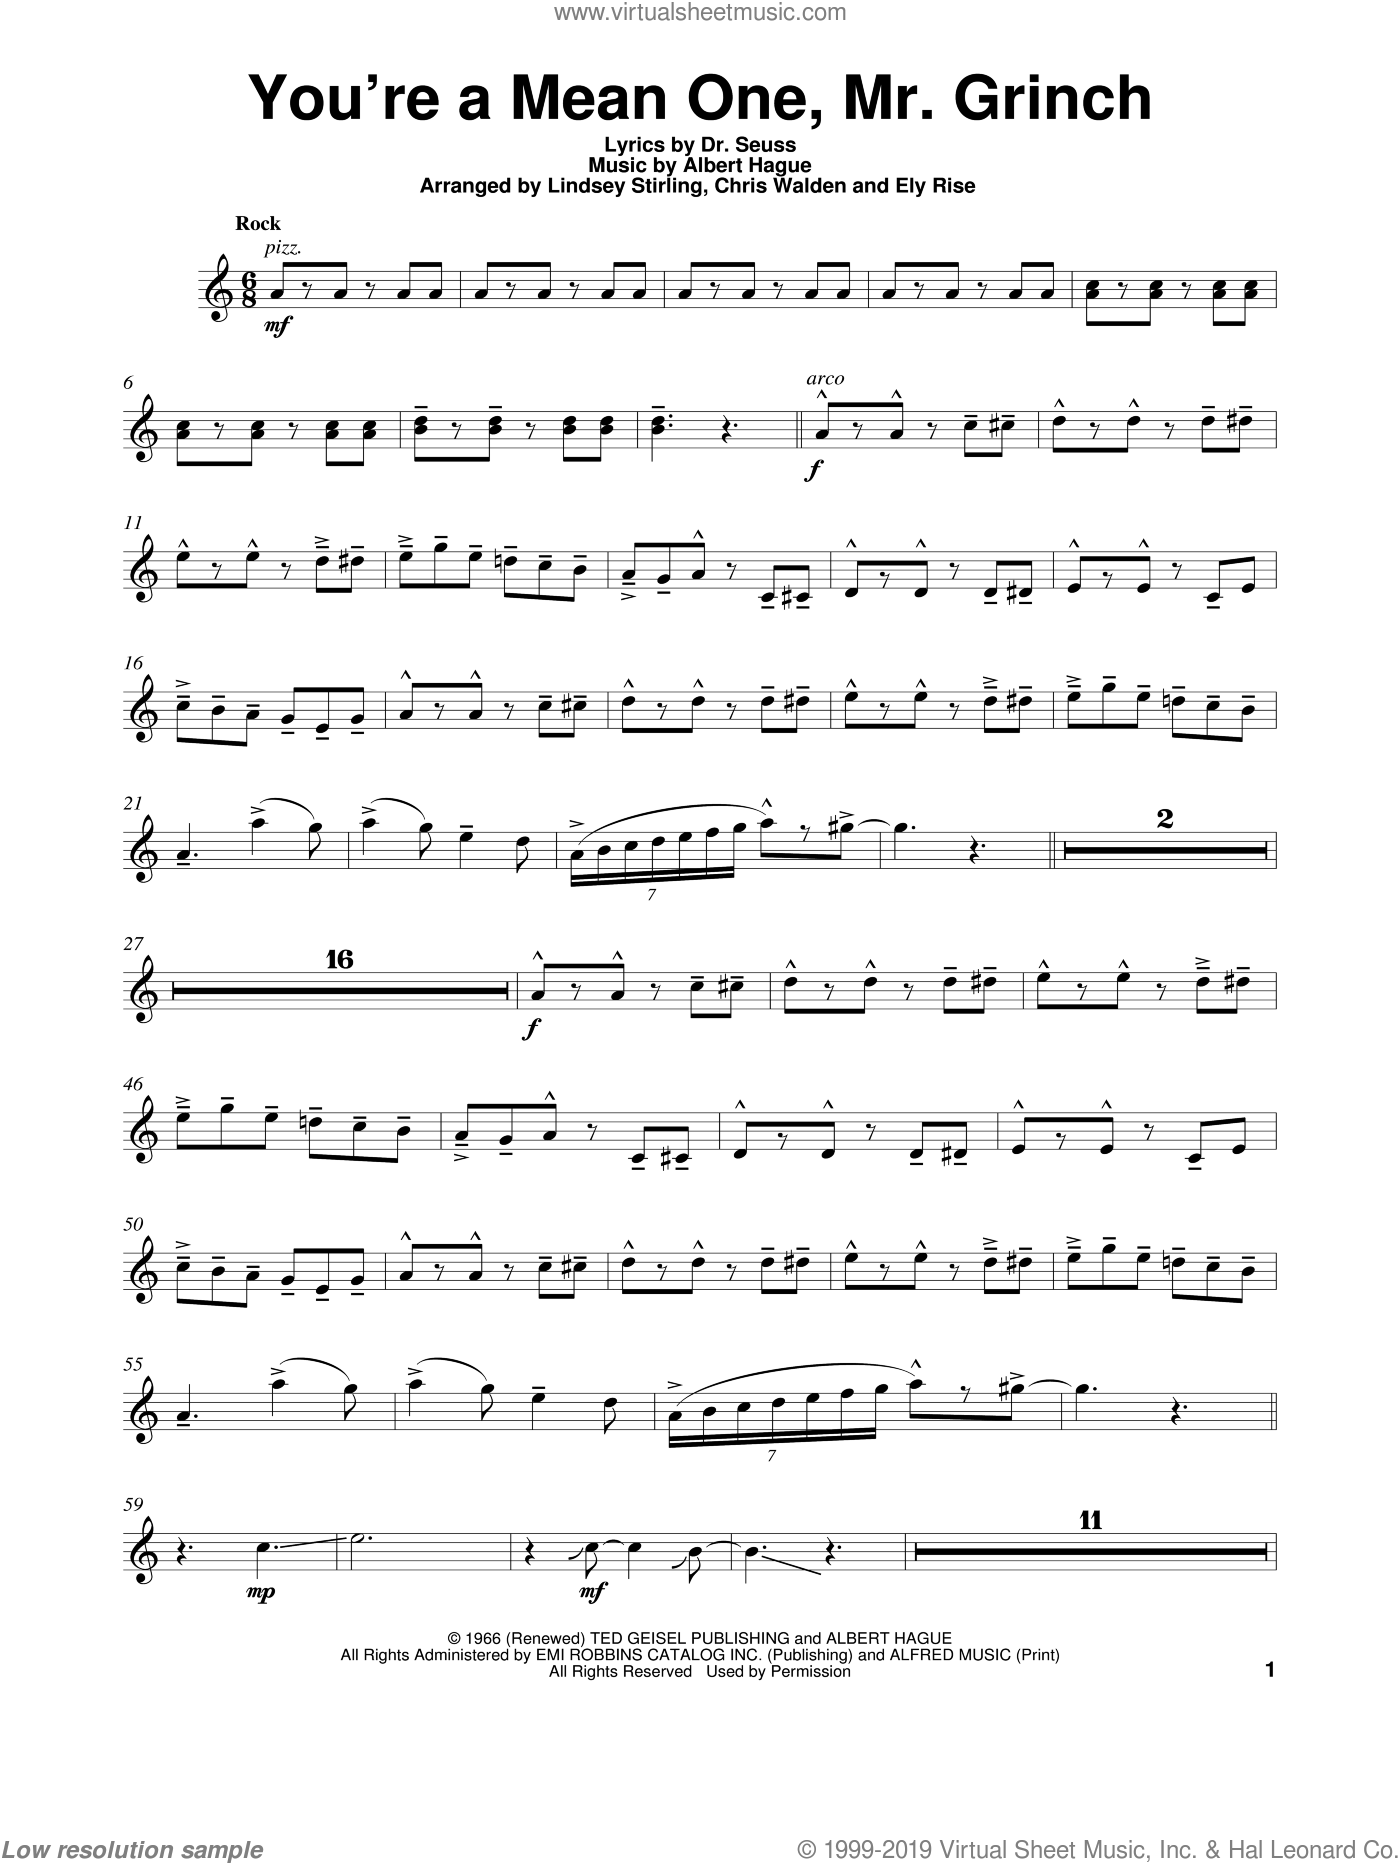 Stirling - You're A Mean One, Mr. Grinch sheet music for violin solo